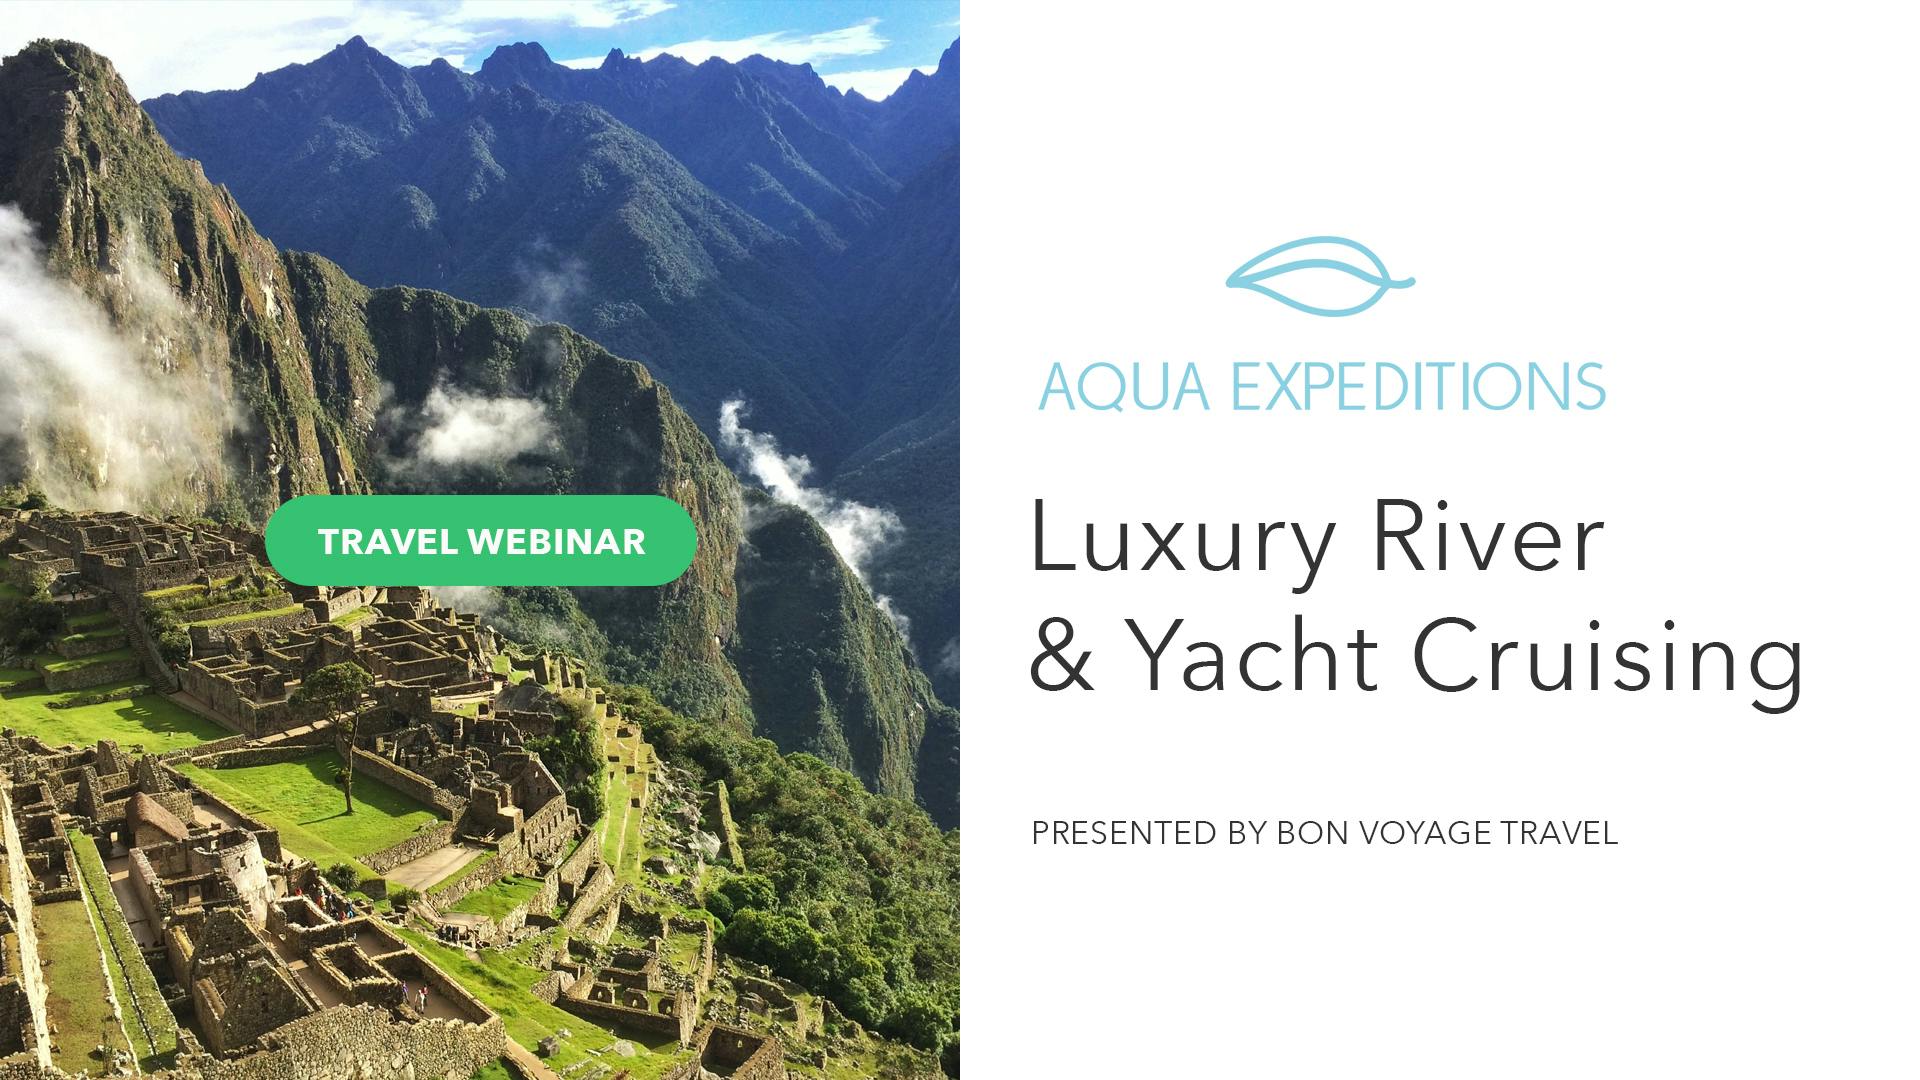 Luxury River and Yacht Cruising with Aqua Expeditions